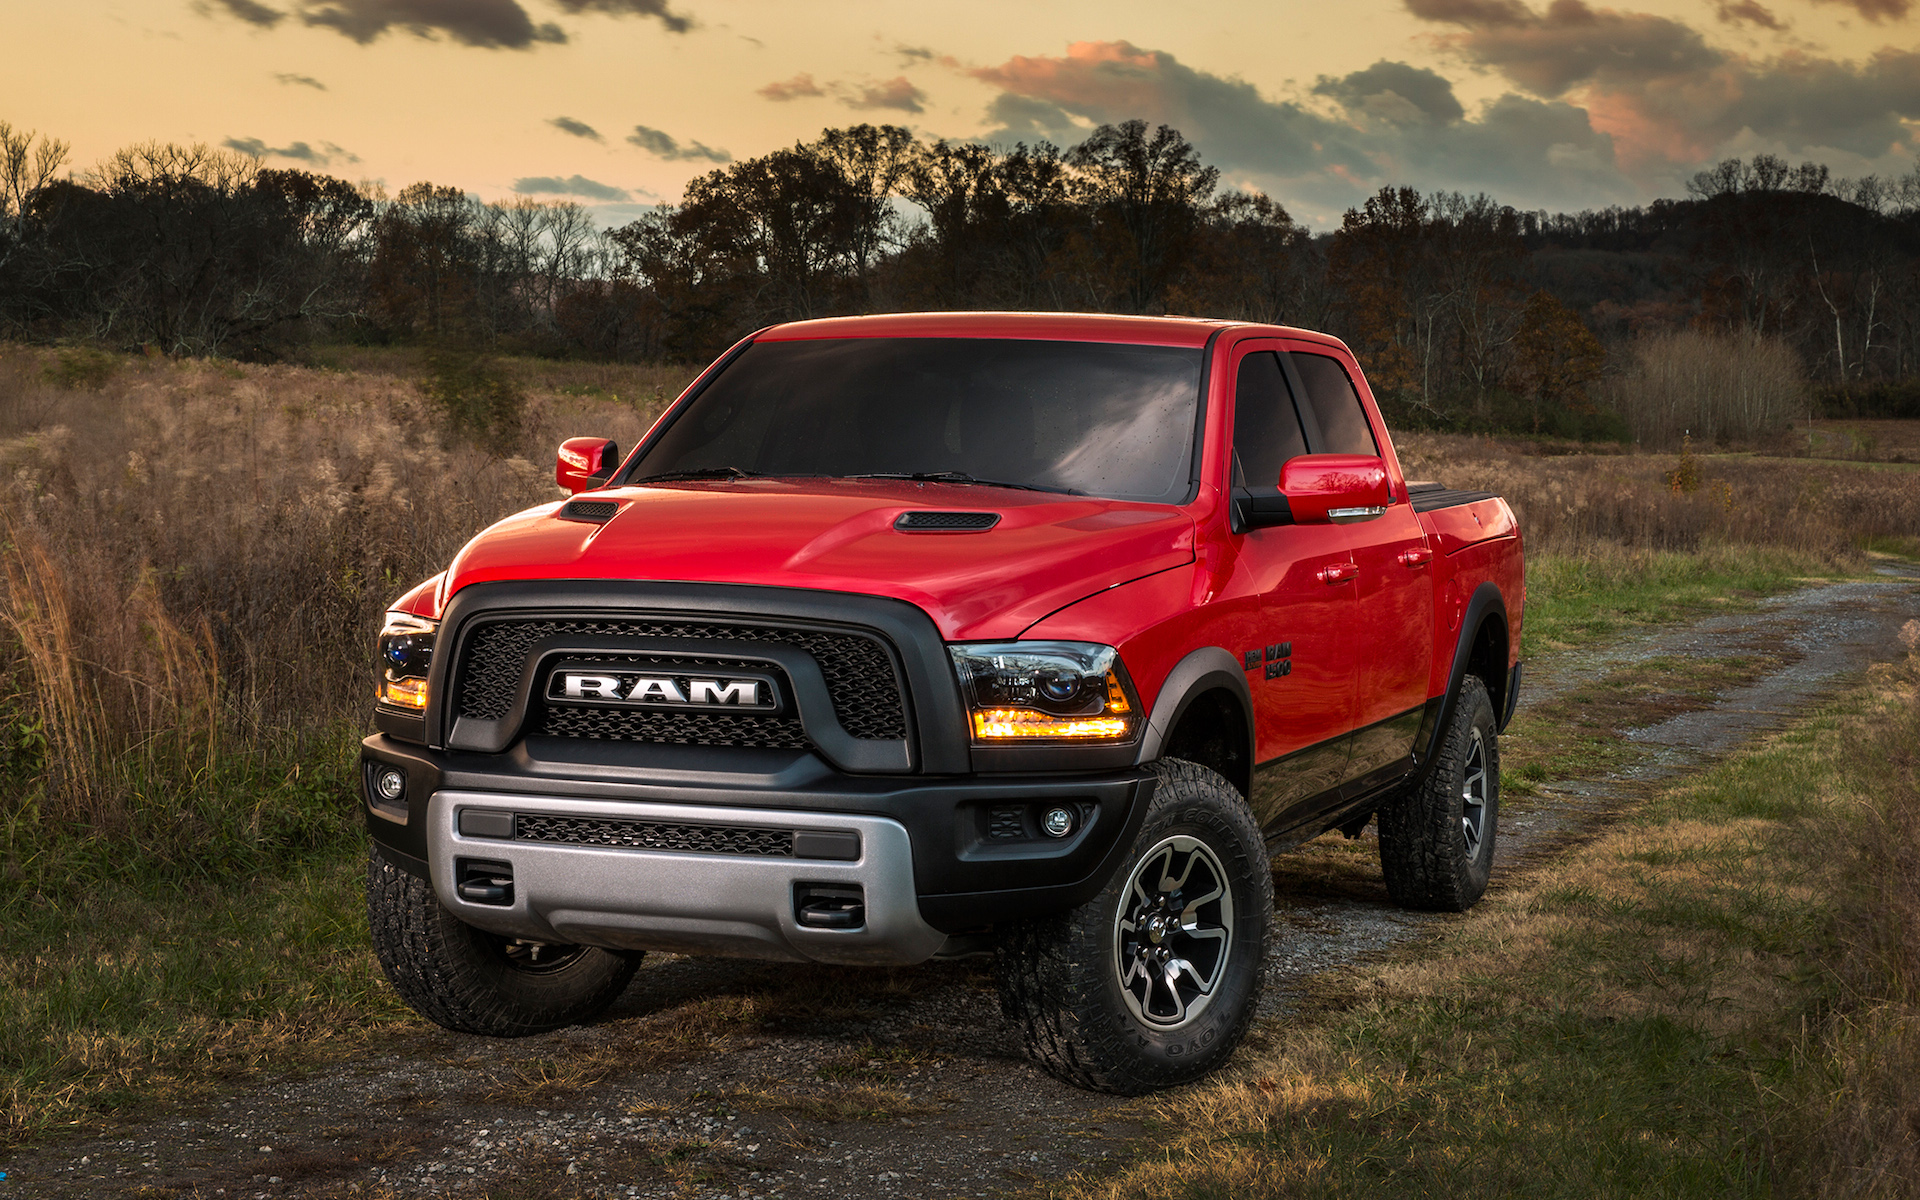 Dodge Ram Concept HD Pictures Full Cars